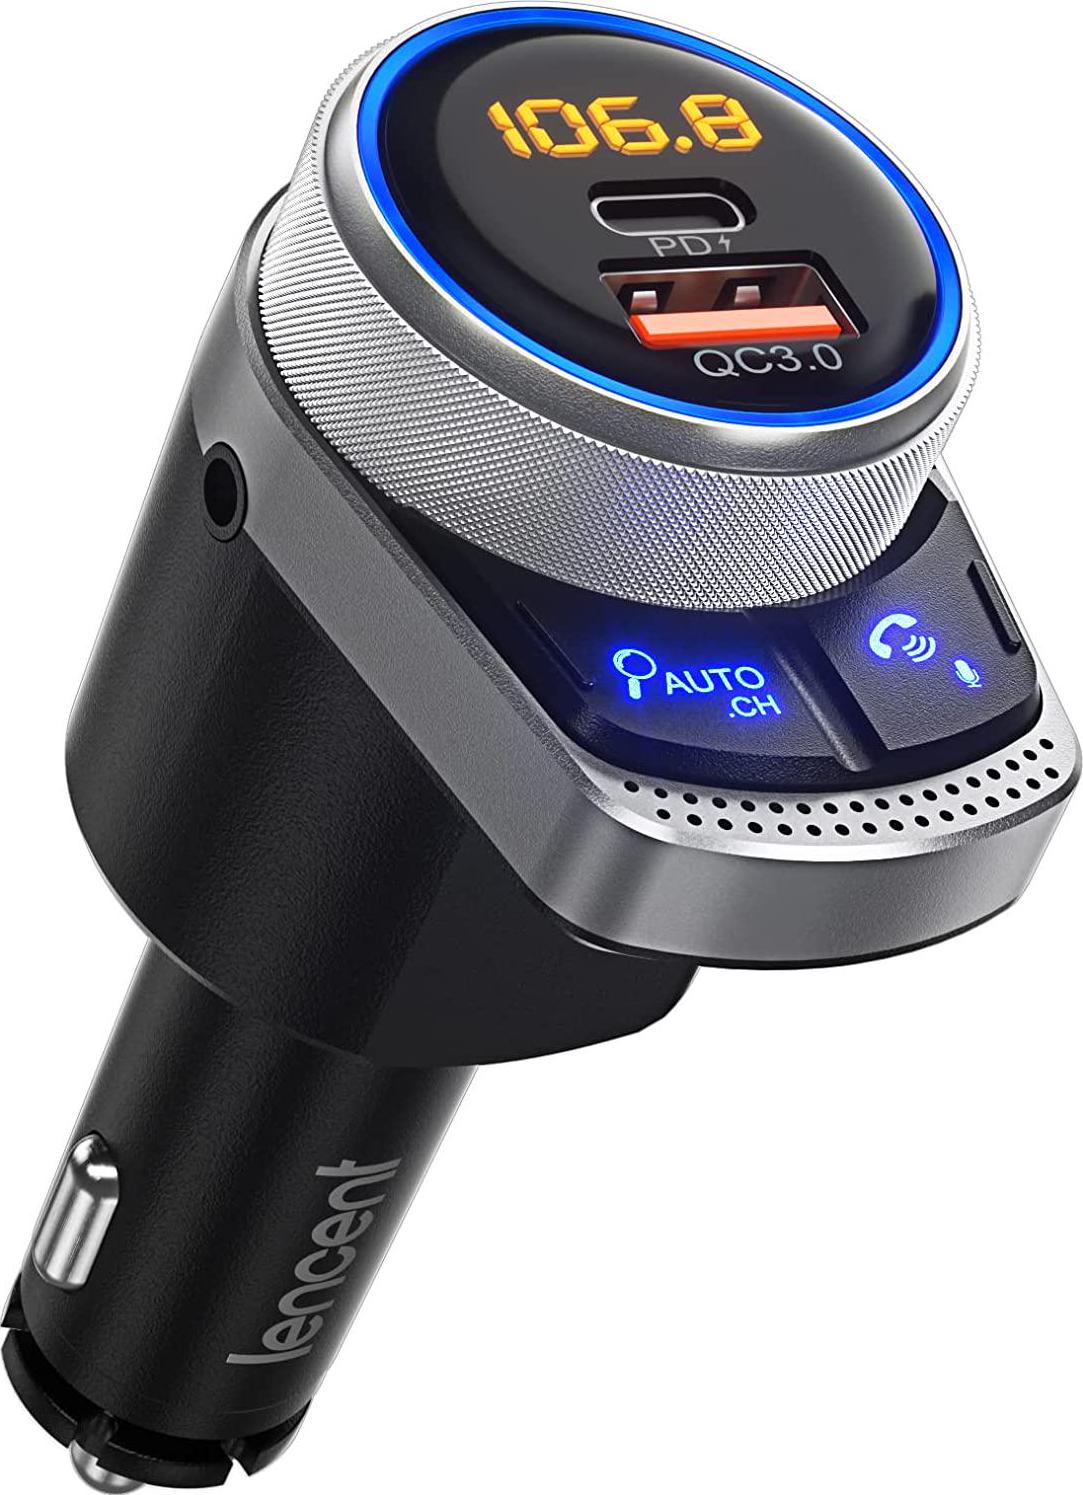 LENCENT, LENCENT FM Transmitter Bluetooth in-car , Auto-Tune Frequency Auto Search Bluetooth Radio Frequency Wireless Car Adapter , Type-C PD 20W and QC3.0 Quick Fast Charge, Support AUX and Hands-Free Calling